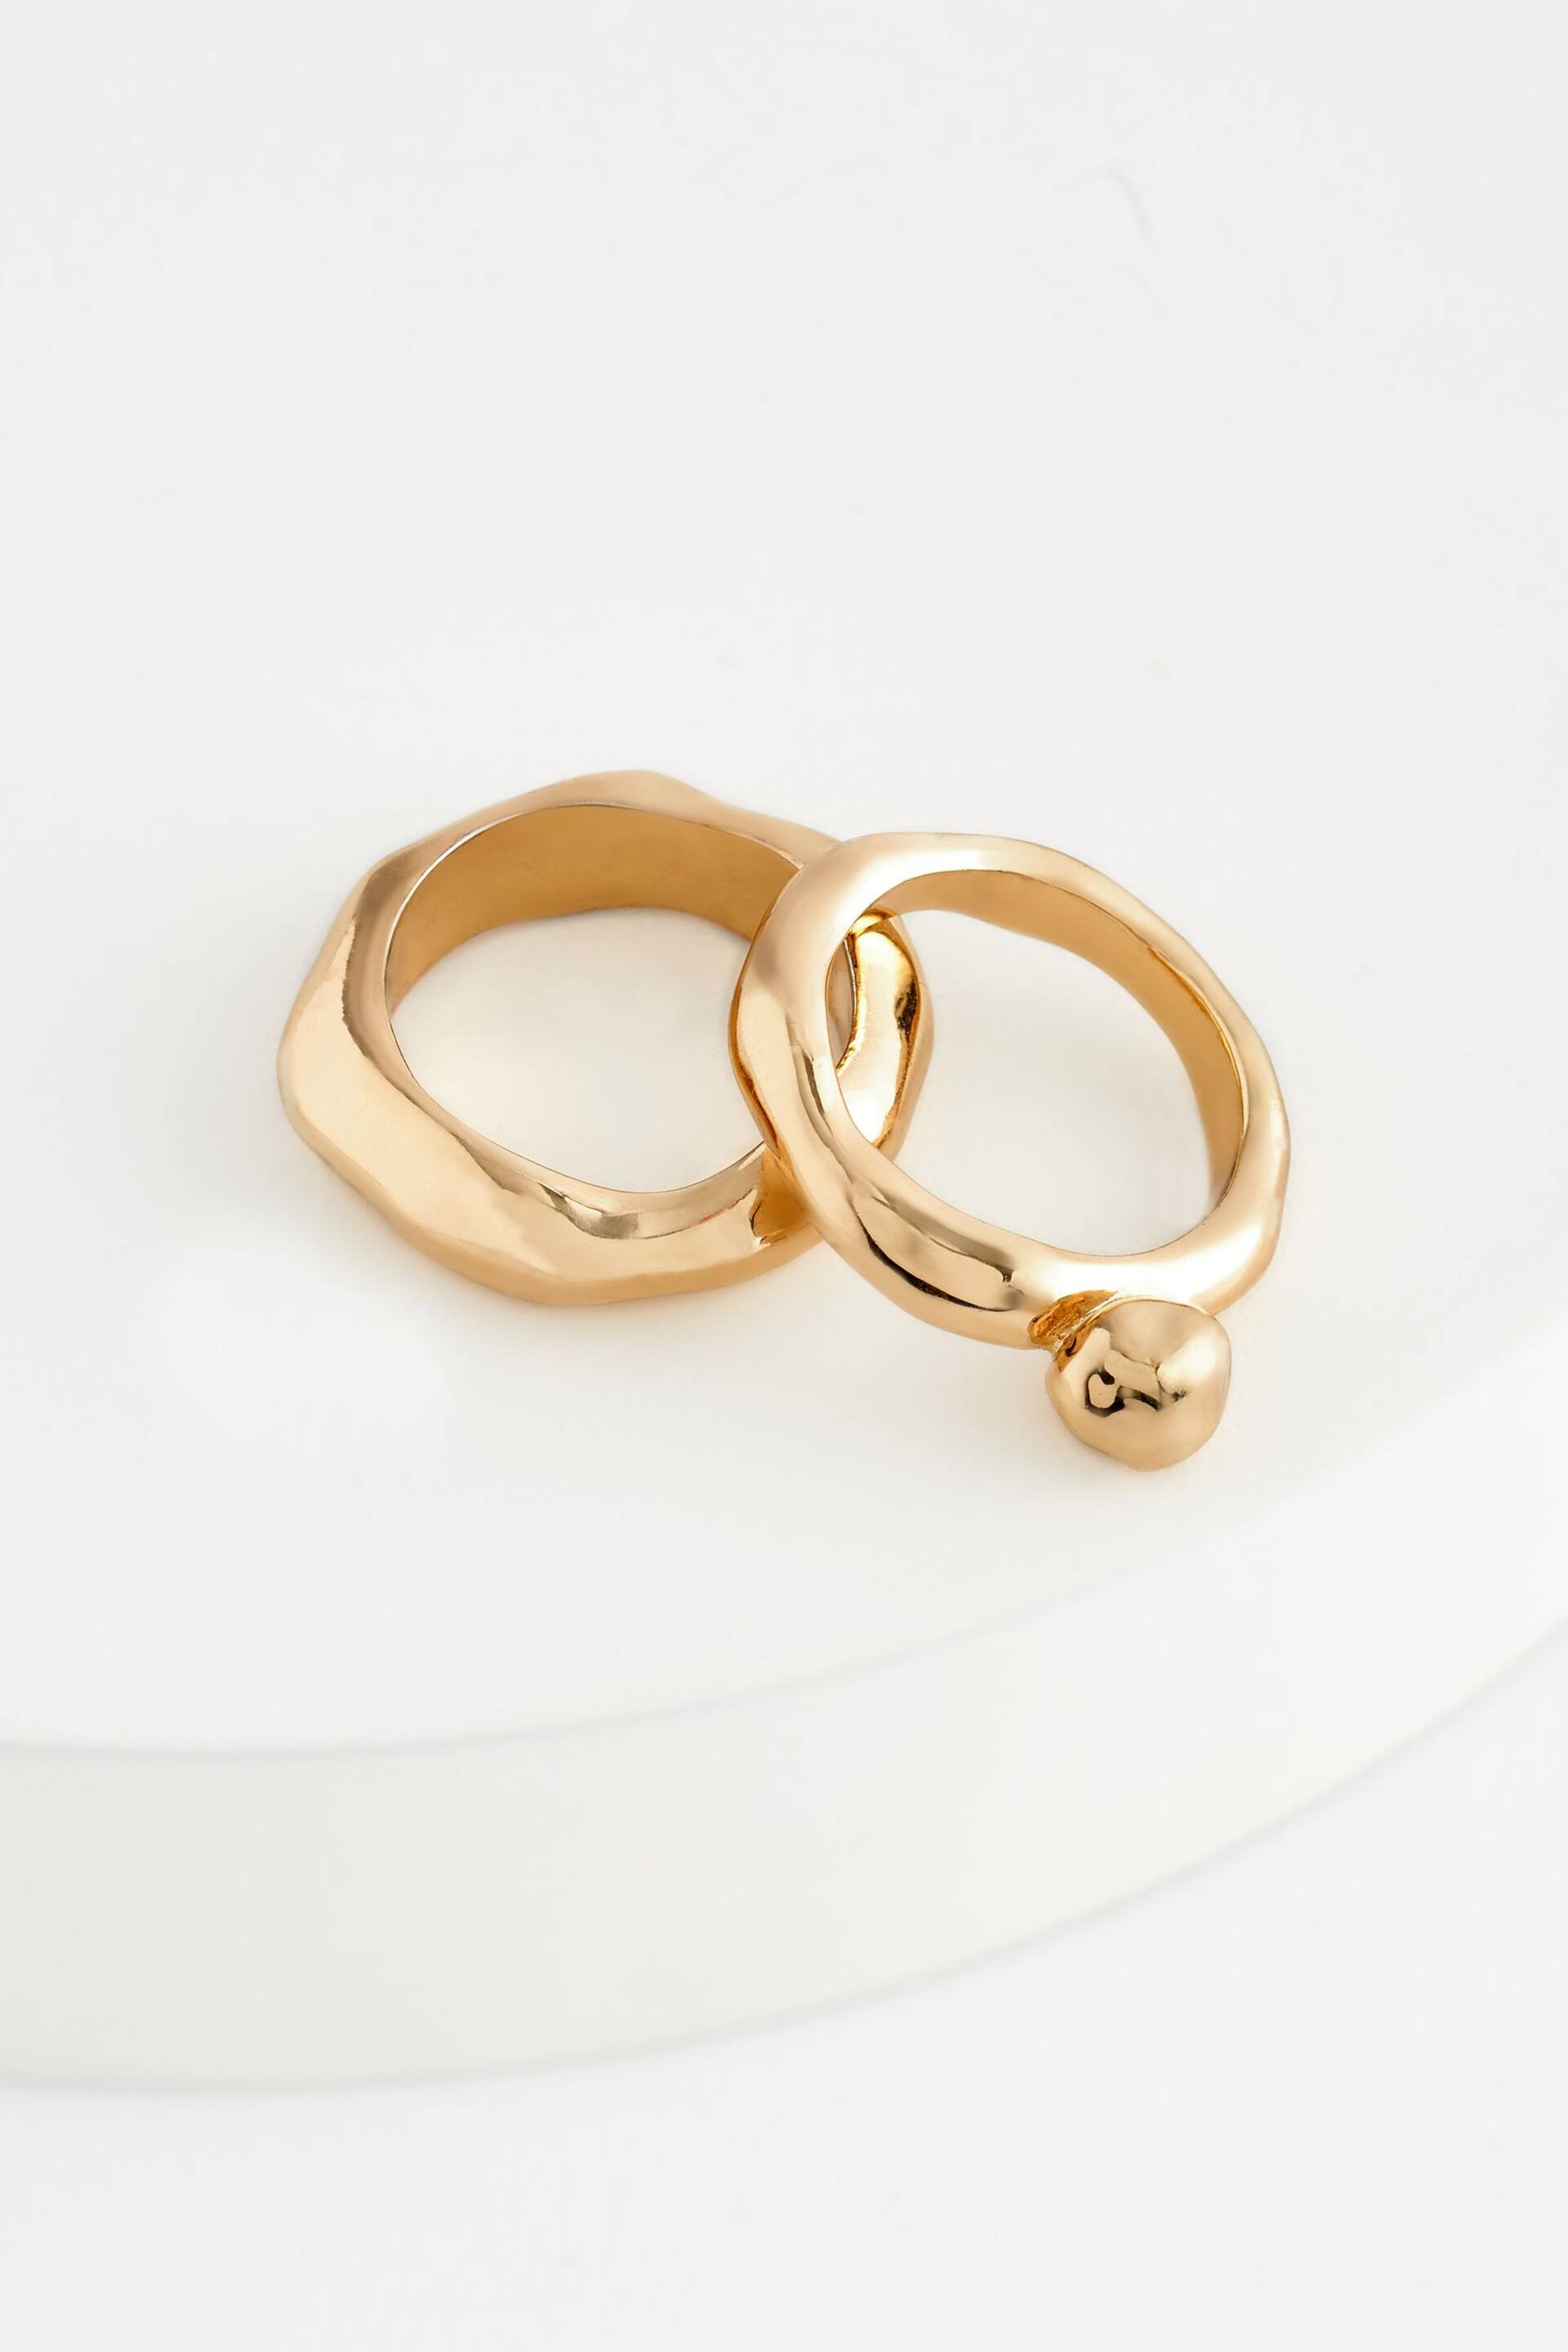 10 Carat Gold Plated N. Premium Chunky Ring Pack Made With Recycled Brass - Image 4 of 4